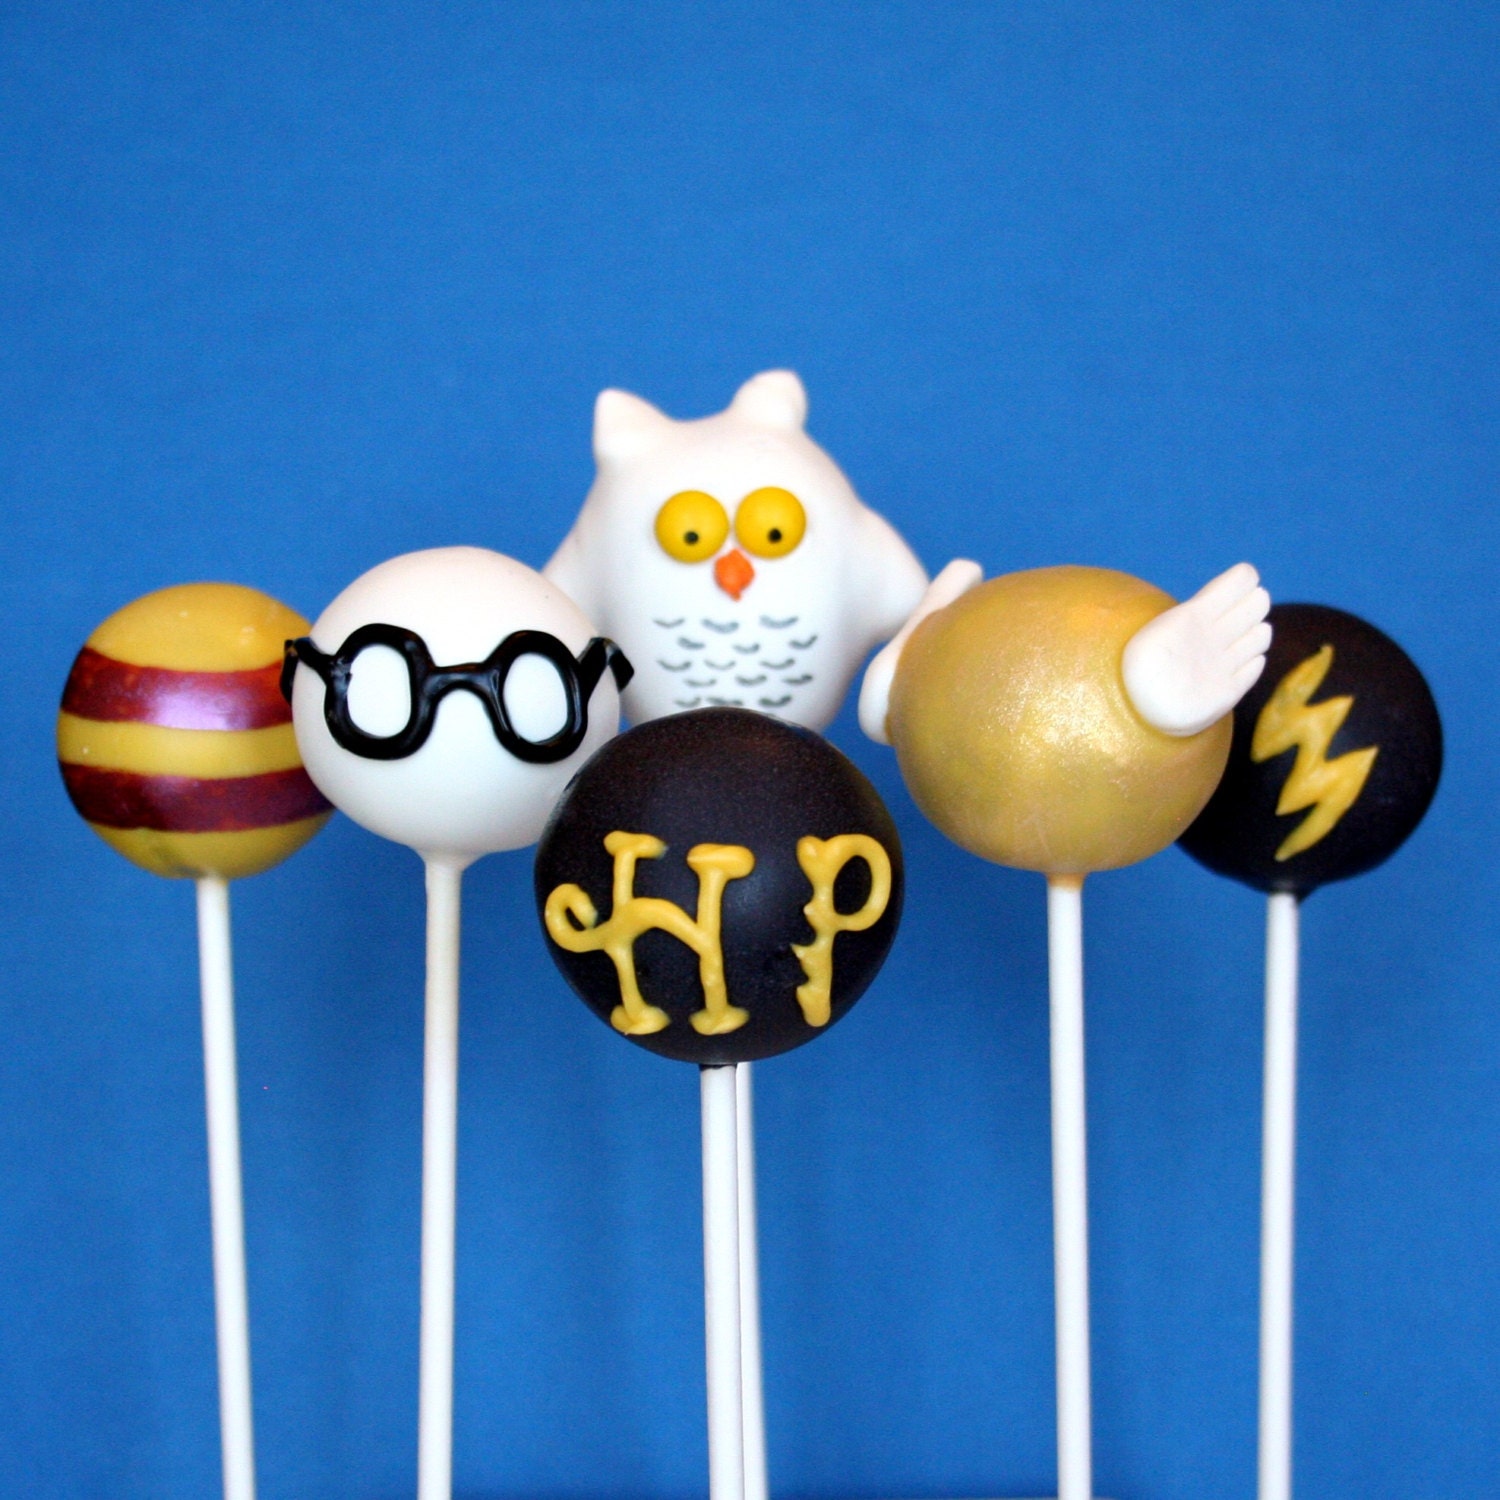 12 Harry Potter Cake Pops with Golden Snitch and Hedwig the Owl, for party favors, movie night, or gift for a J.K. Rowling fan